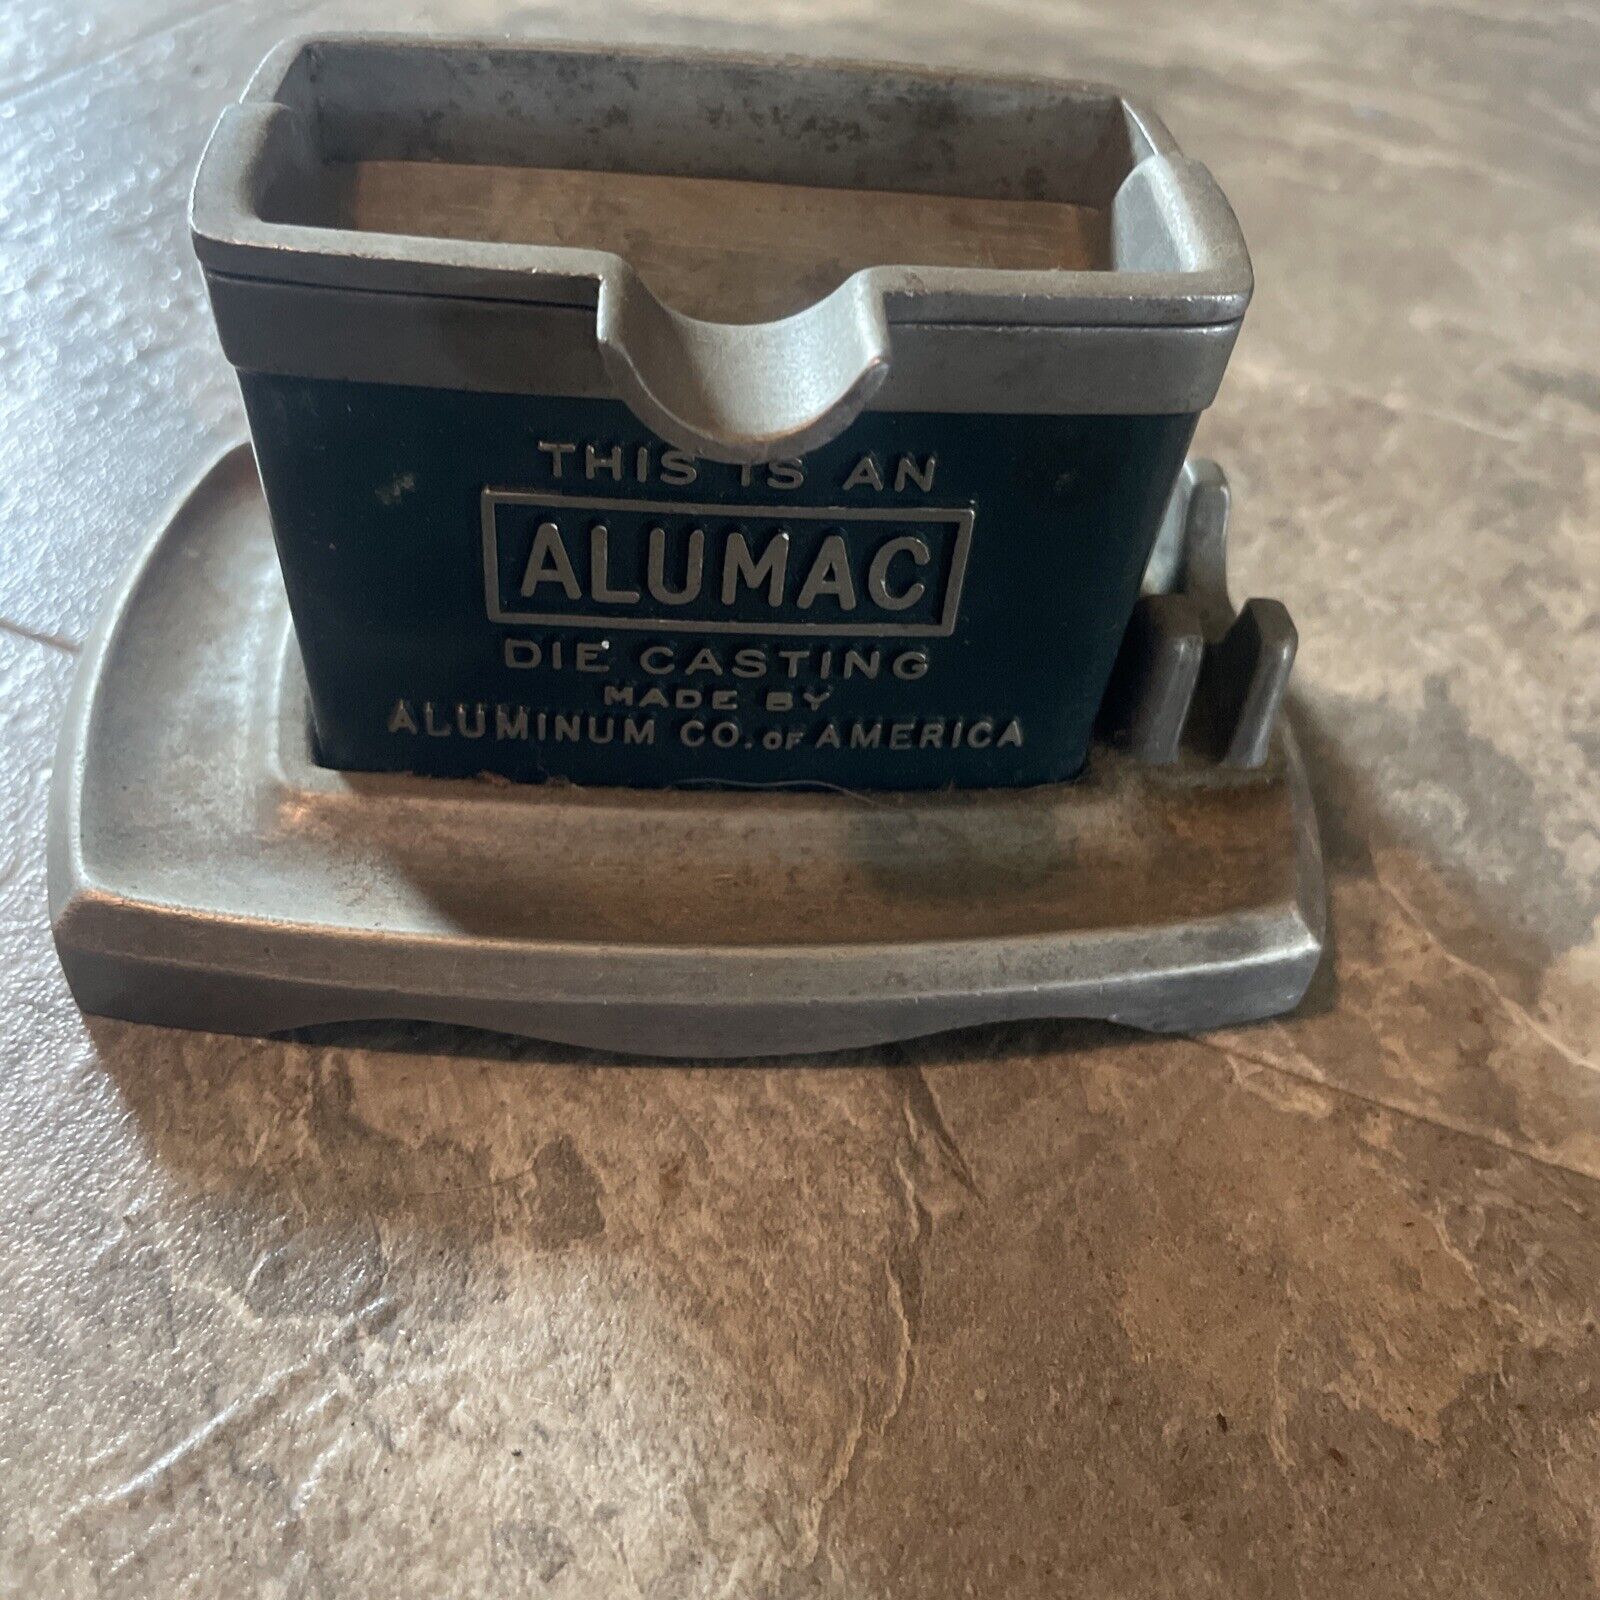 Vintage 1925 Alumac Die Casting Spill-Top Ashtray By Aluminum Co. Of America